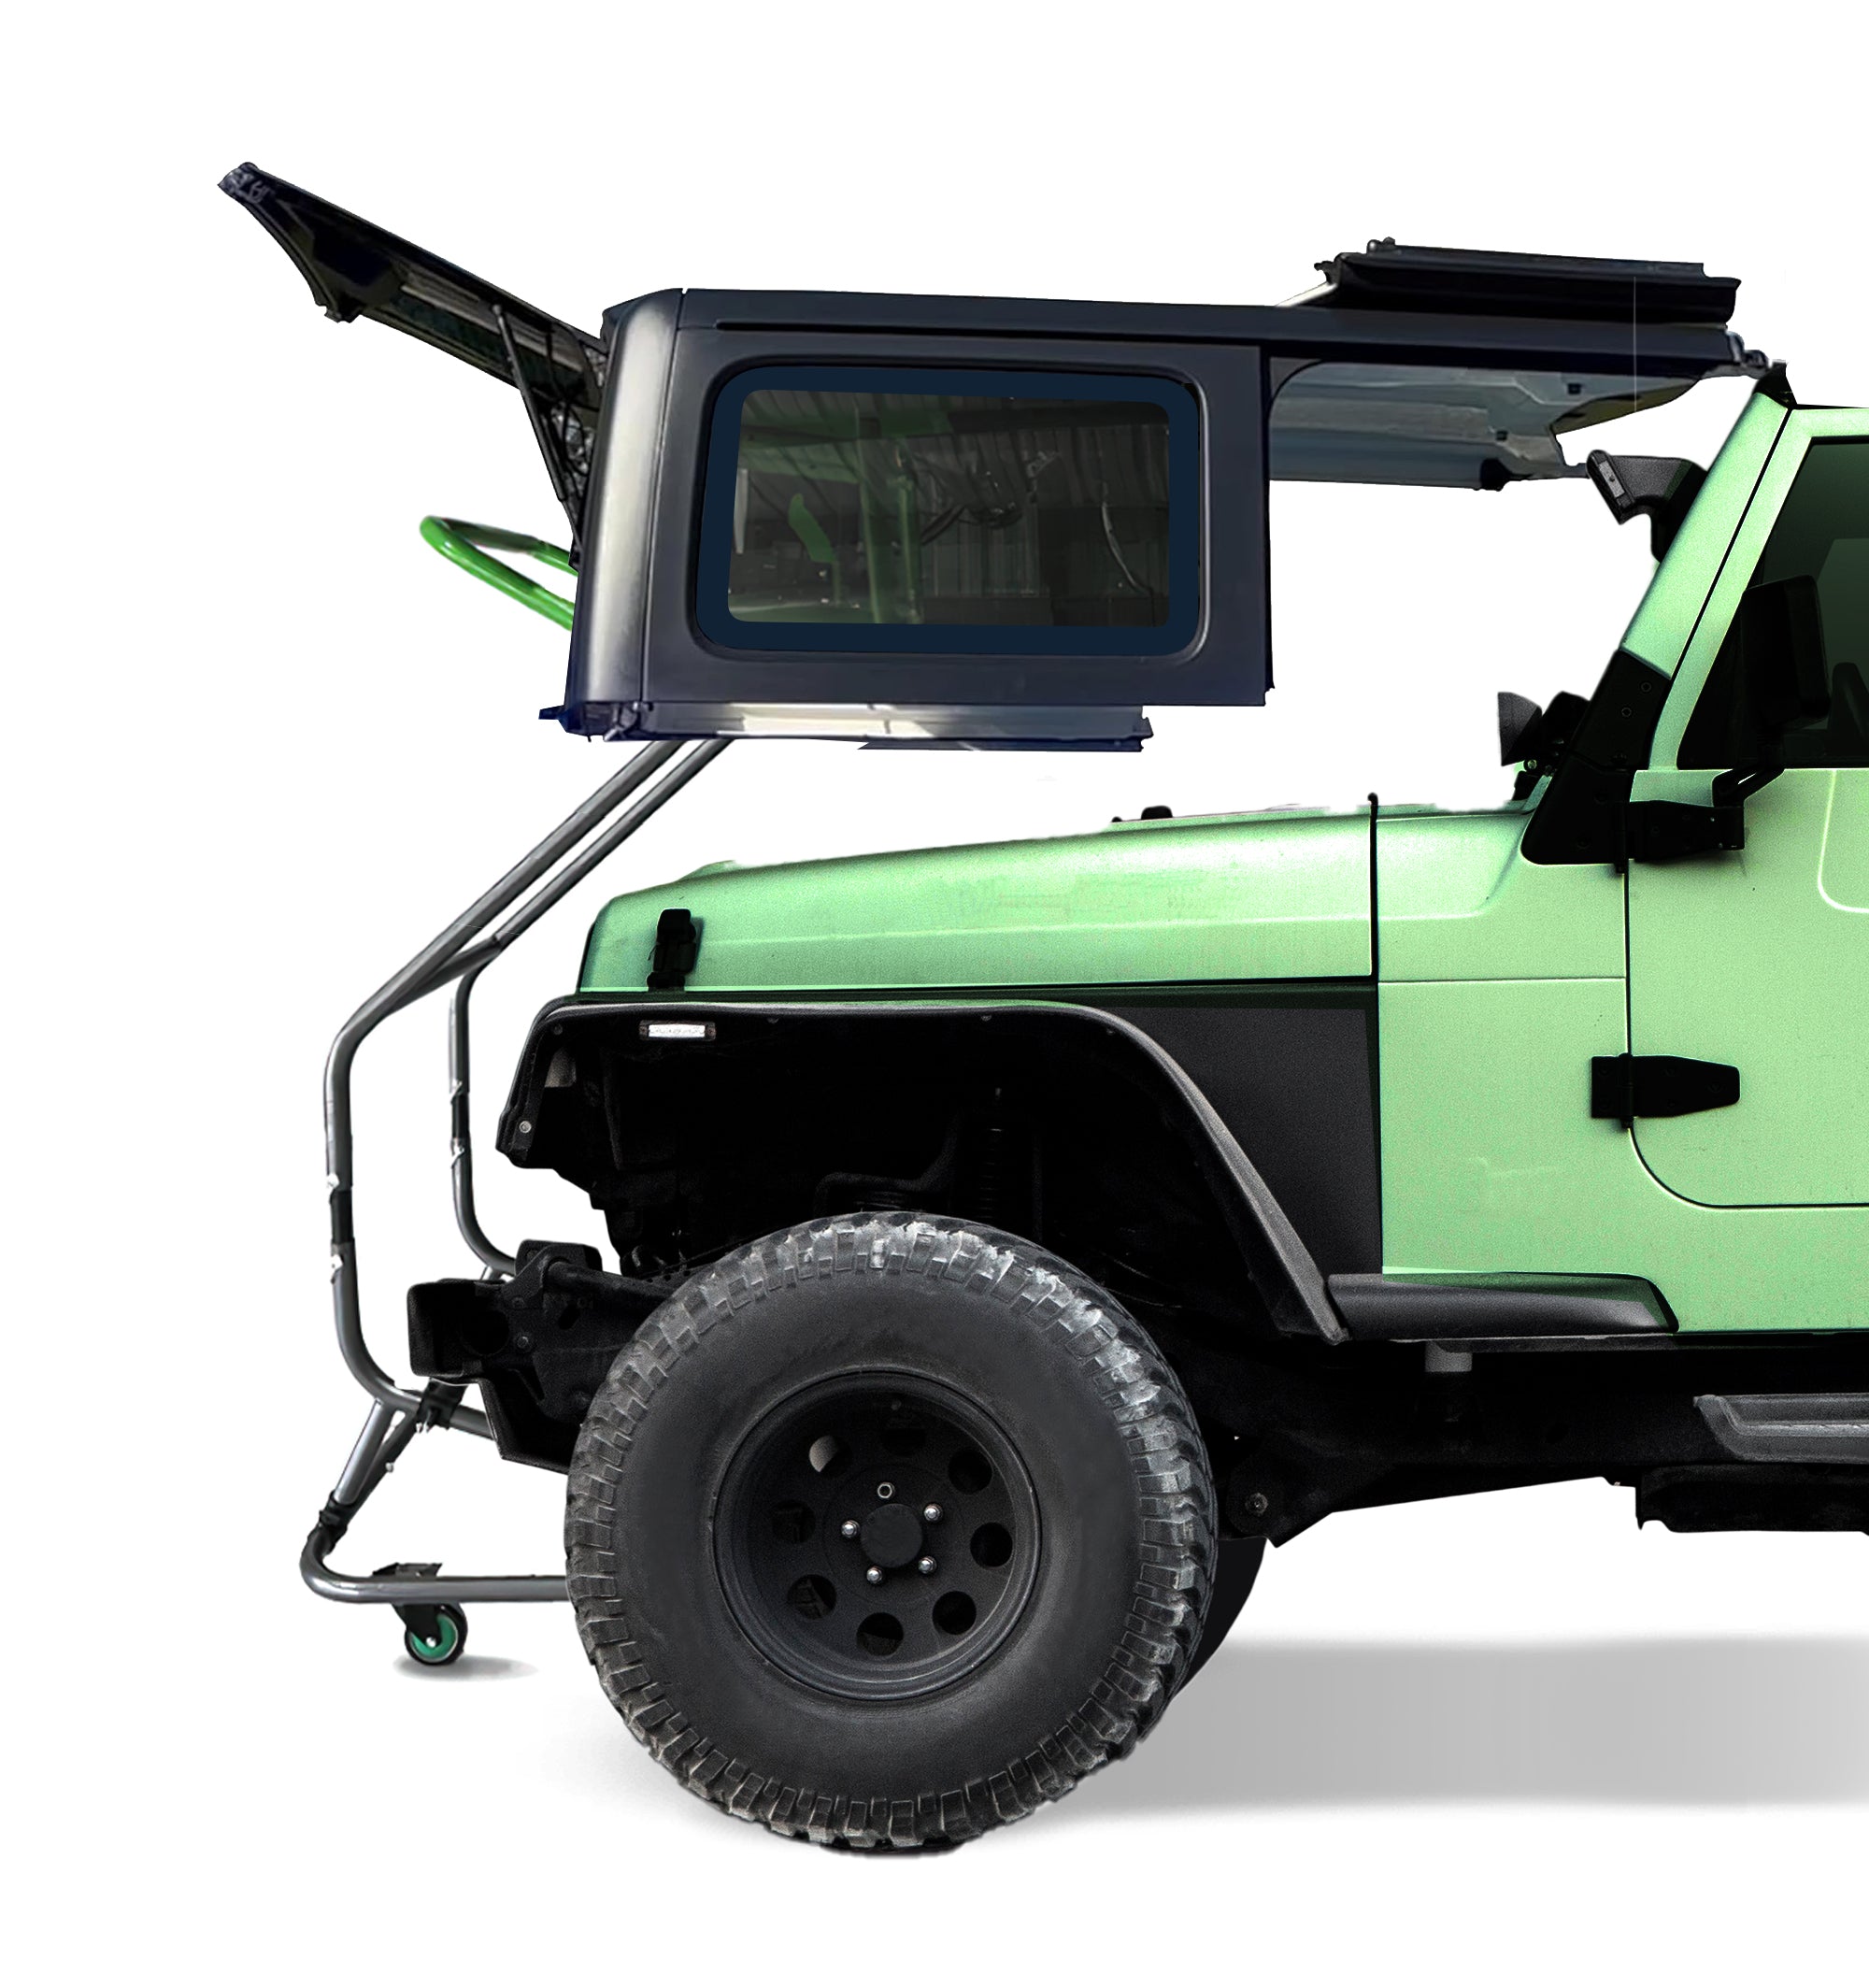 Picture of TopLift Pro Hardtop Removal Tool for Jeep Wrangler storing the hardtop above the hood